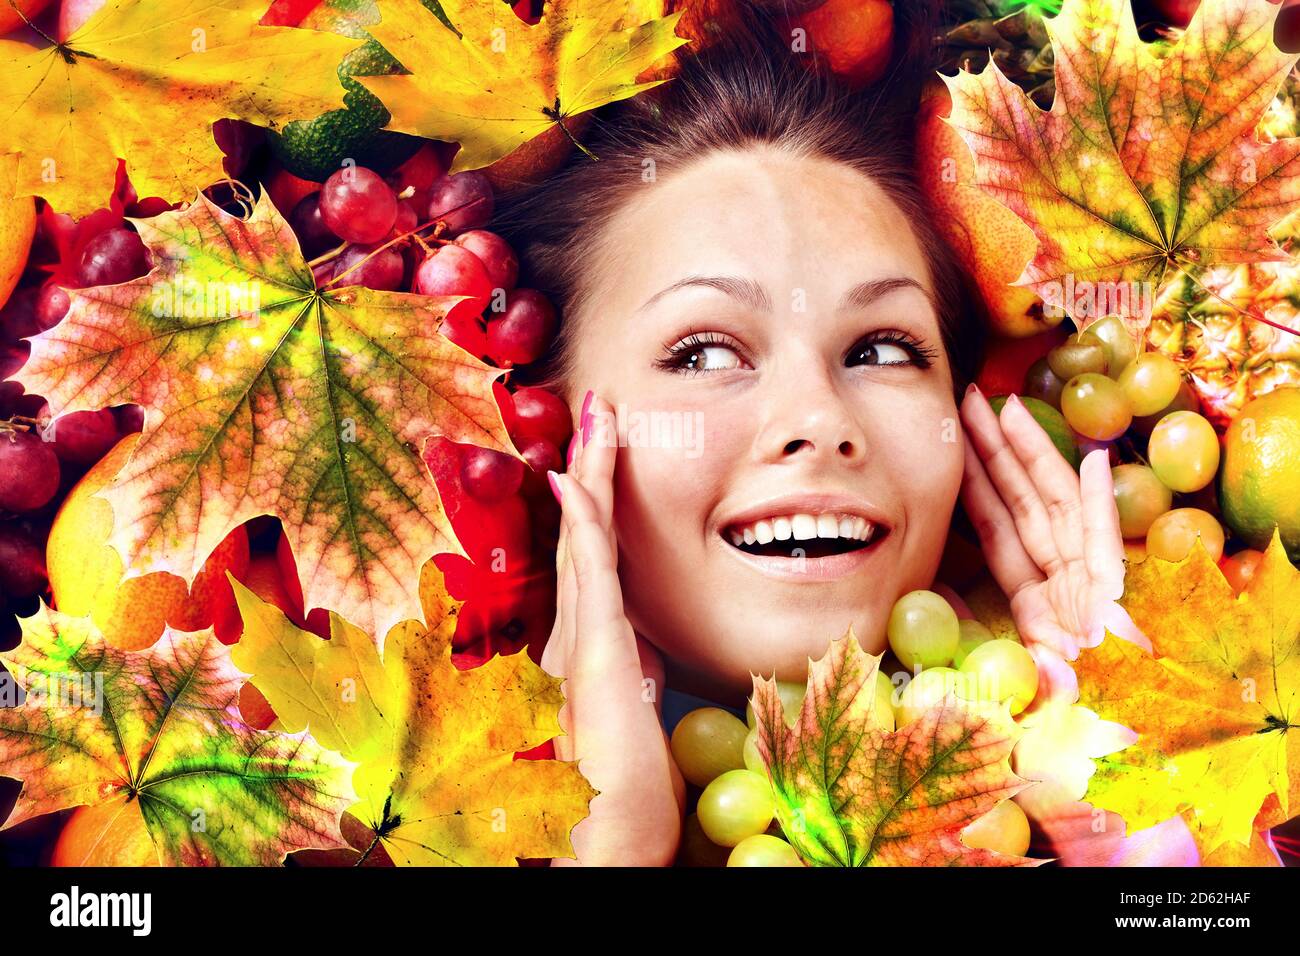 Autumn leaves background with face and hands woman Stock Photo